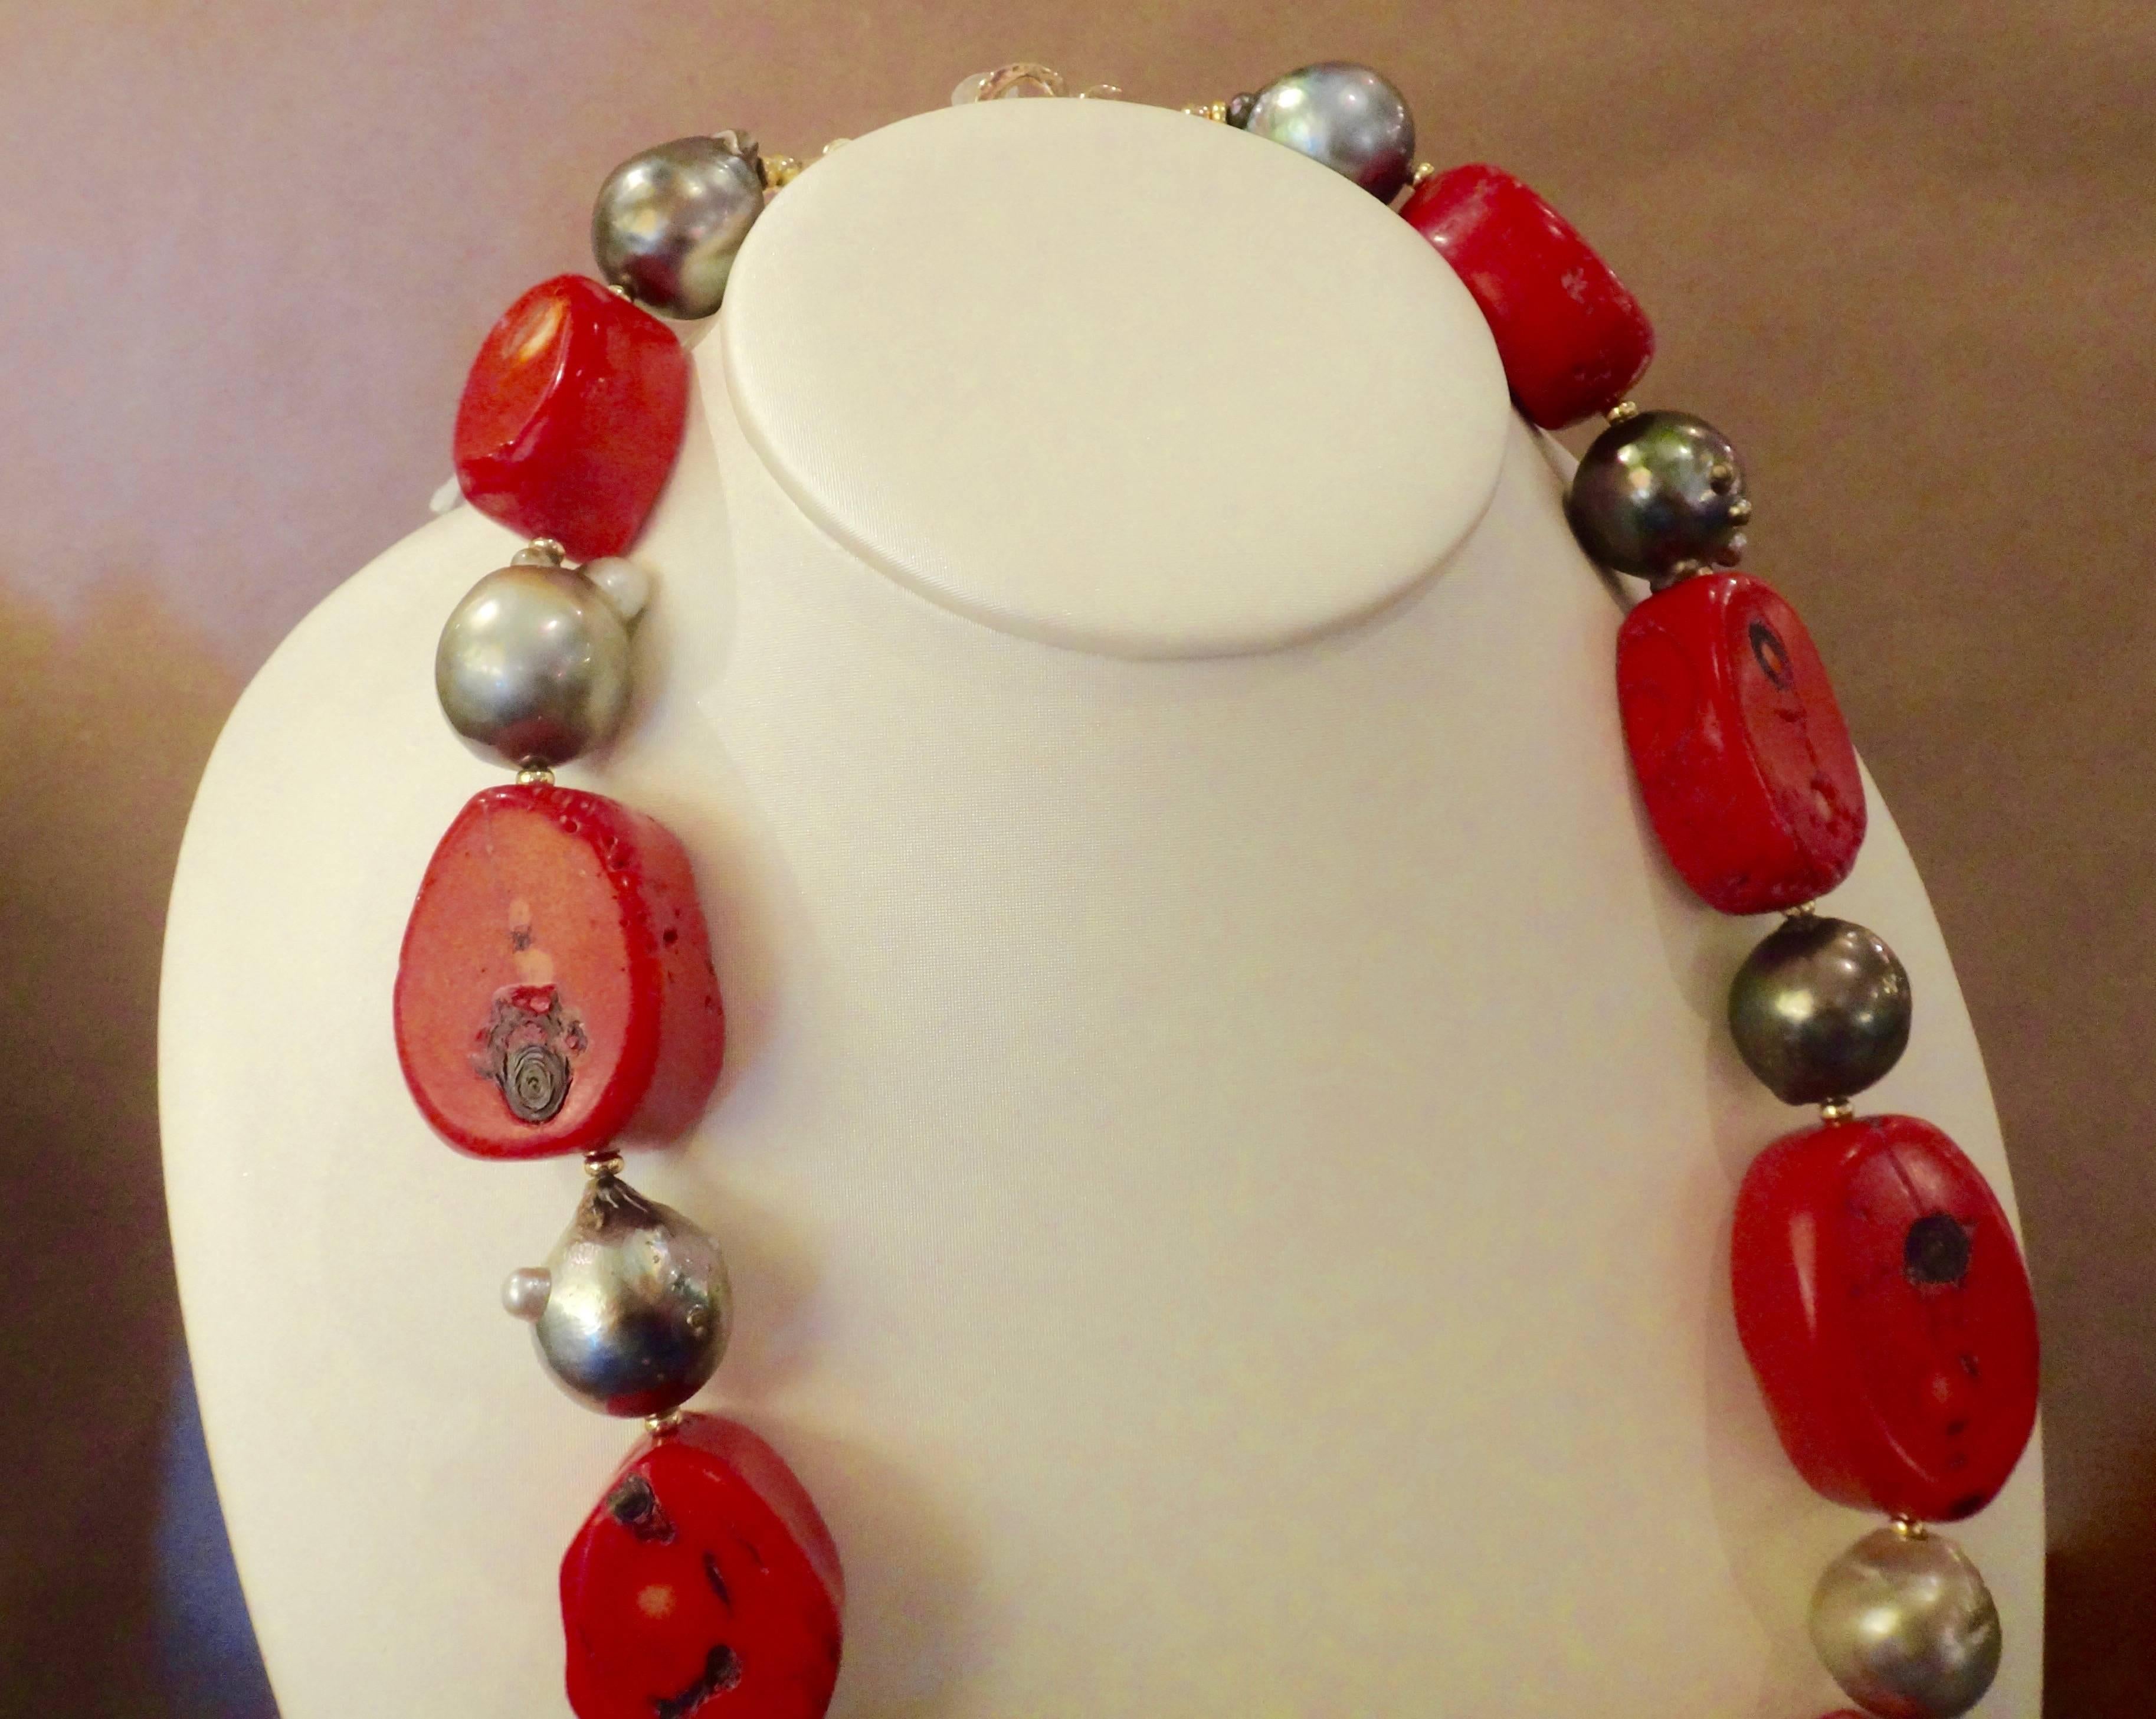 Huge slices of tomato red coral are interspersed with 17mm (plus) baroque Tahitian pearls in this bold necklace.  The coral has natural dark inclusions which play off and compliment the pearls.  There are a range of gray tones from light to dark in